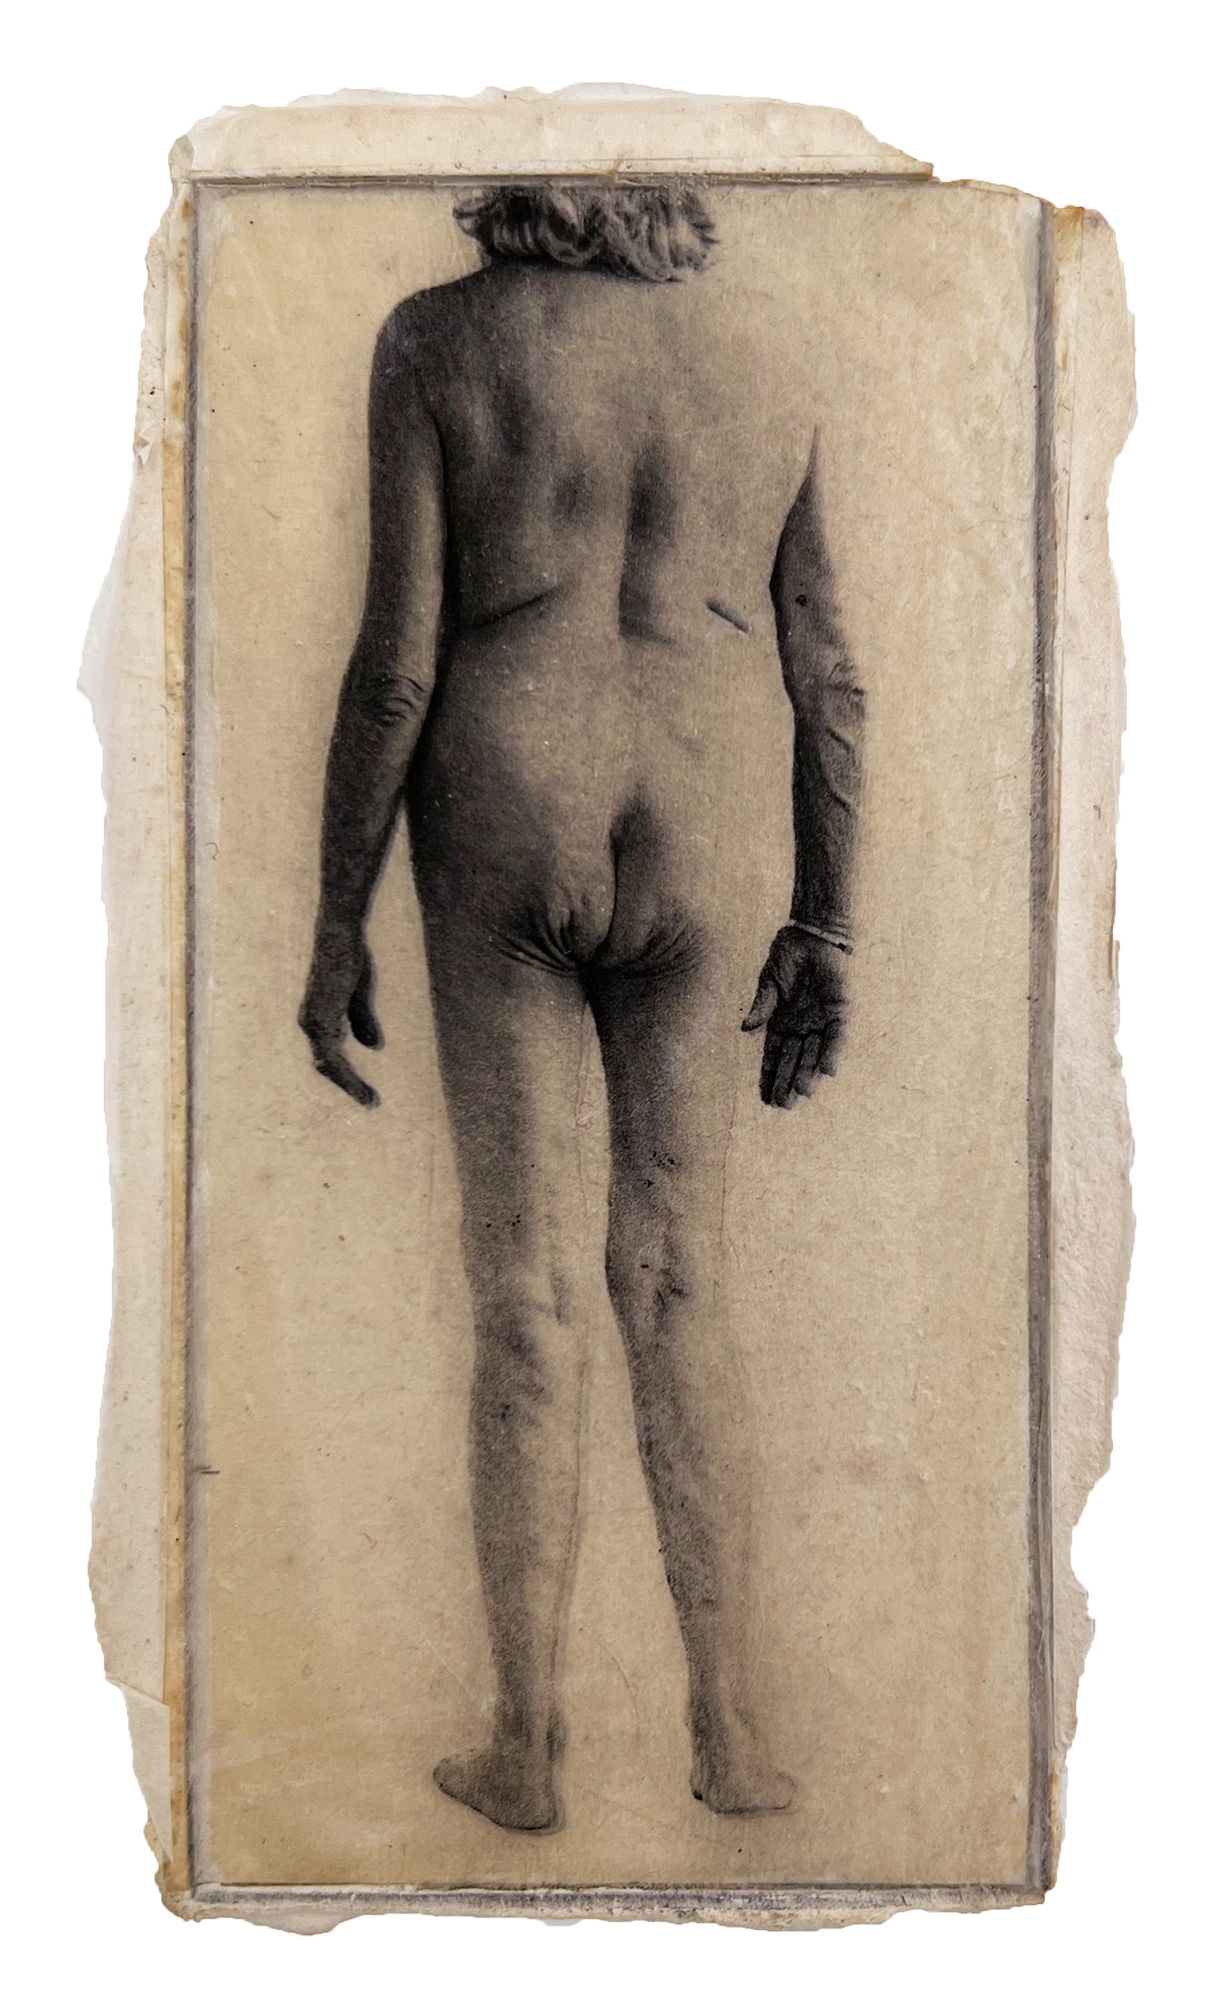 A photo print on special paper printed on plaster shows an elderly woman, standing, nude from neck to toe and seen from the rear, with sagging skin, and veins showing through arms and legs.